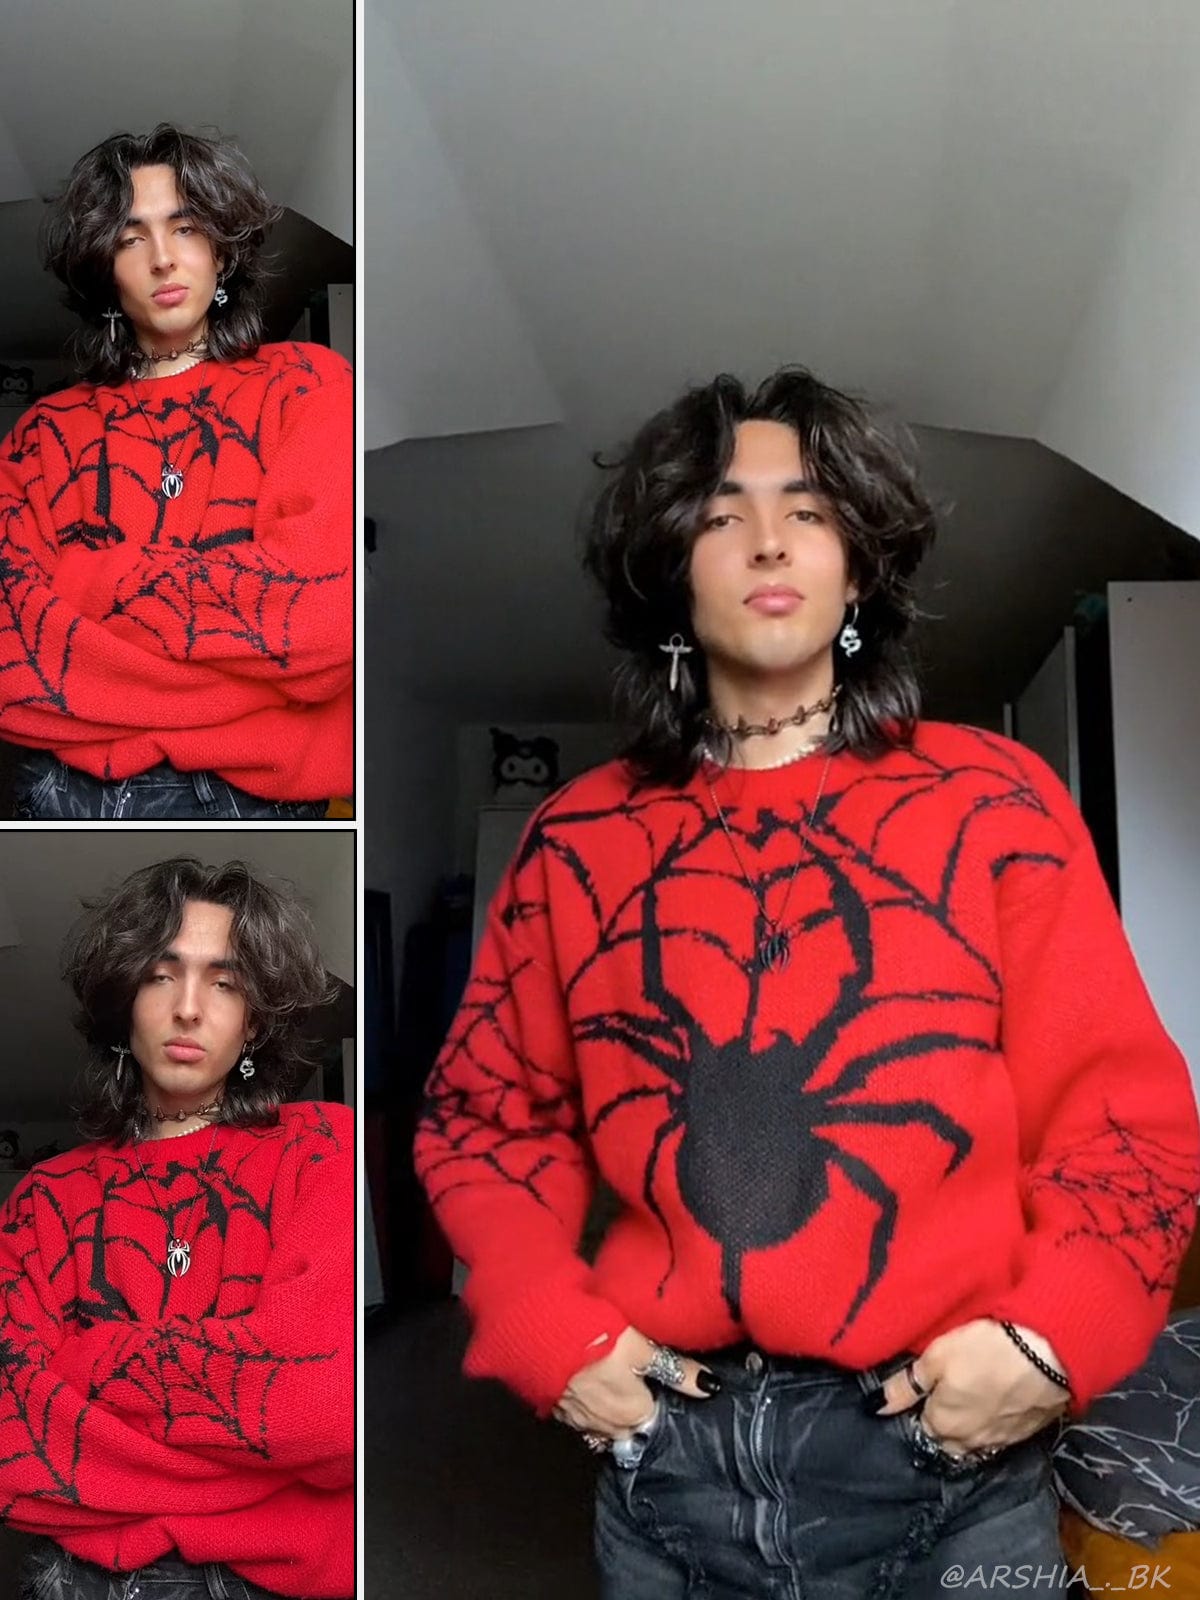 NEV Distressed Spider Sweater